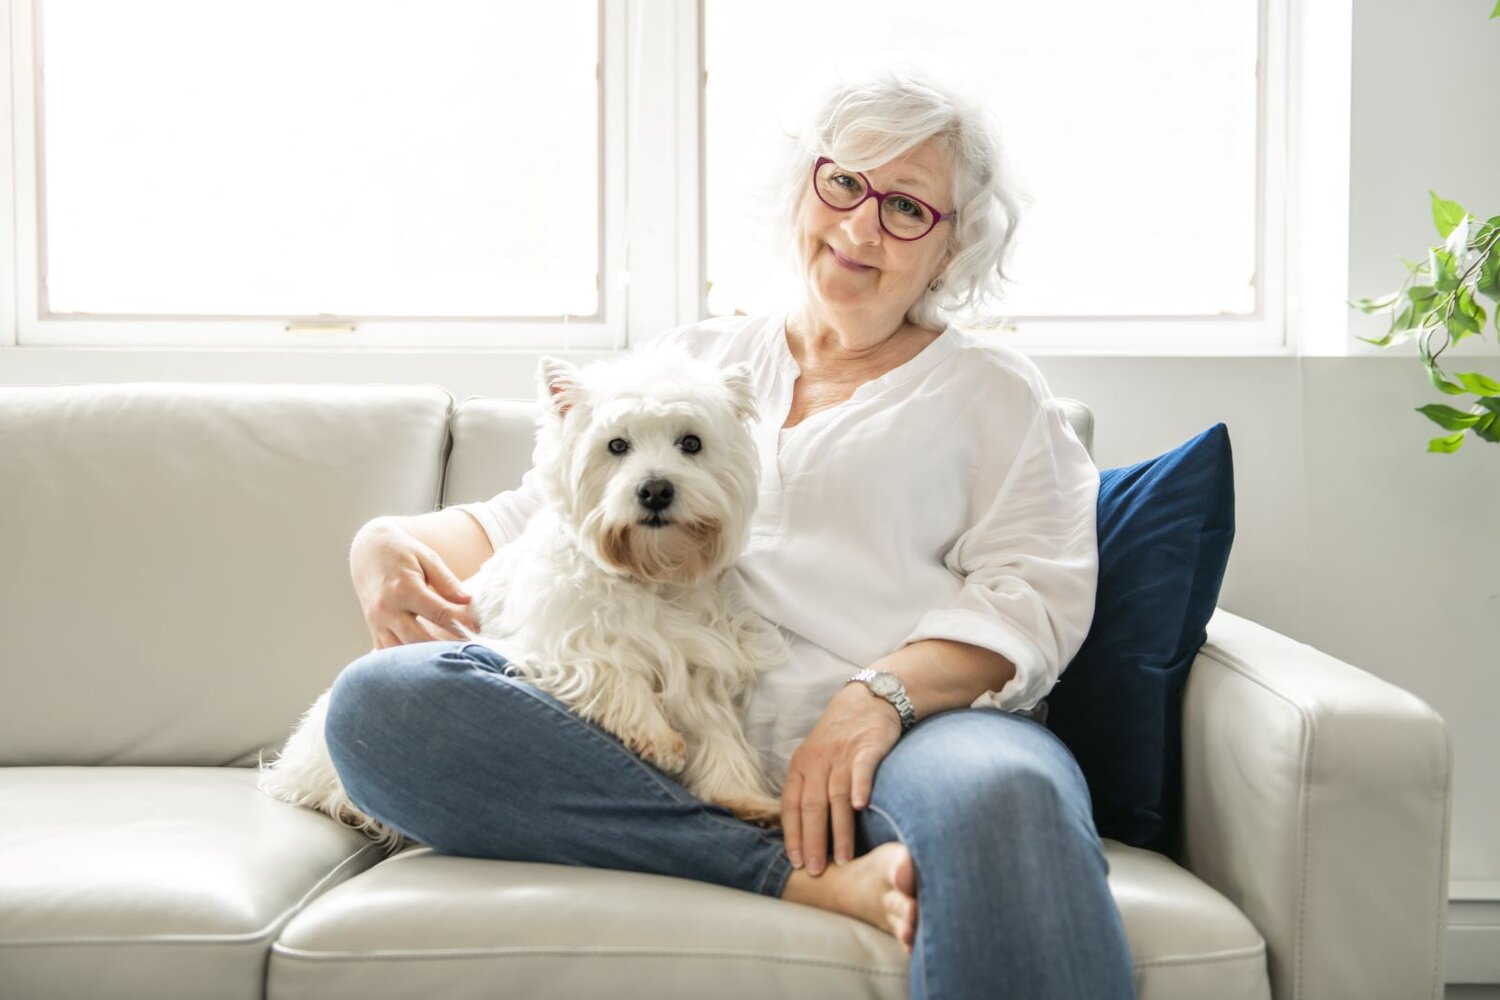 Best dogs for seniors: Retired senior woman sitting on her couch with her therapy dog